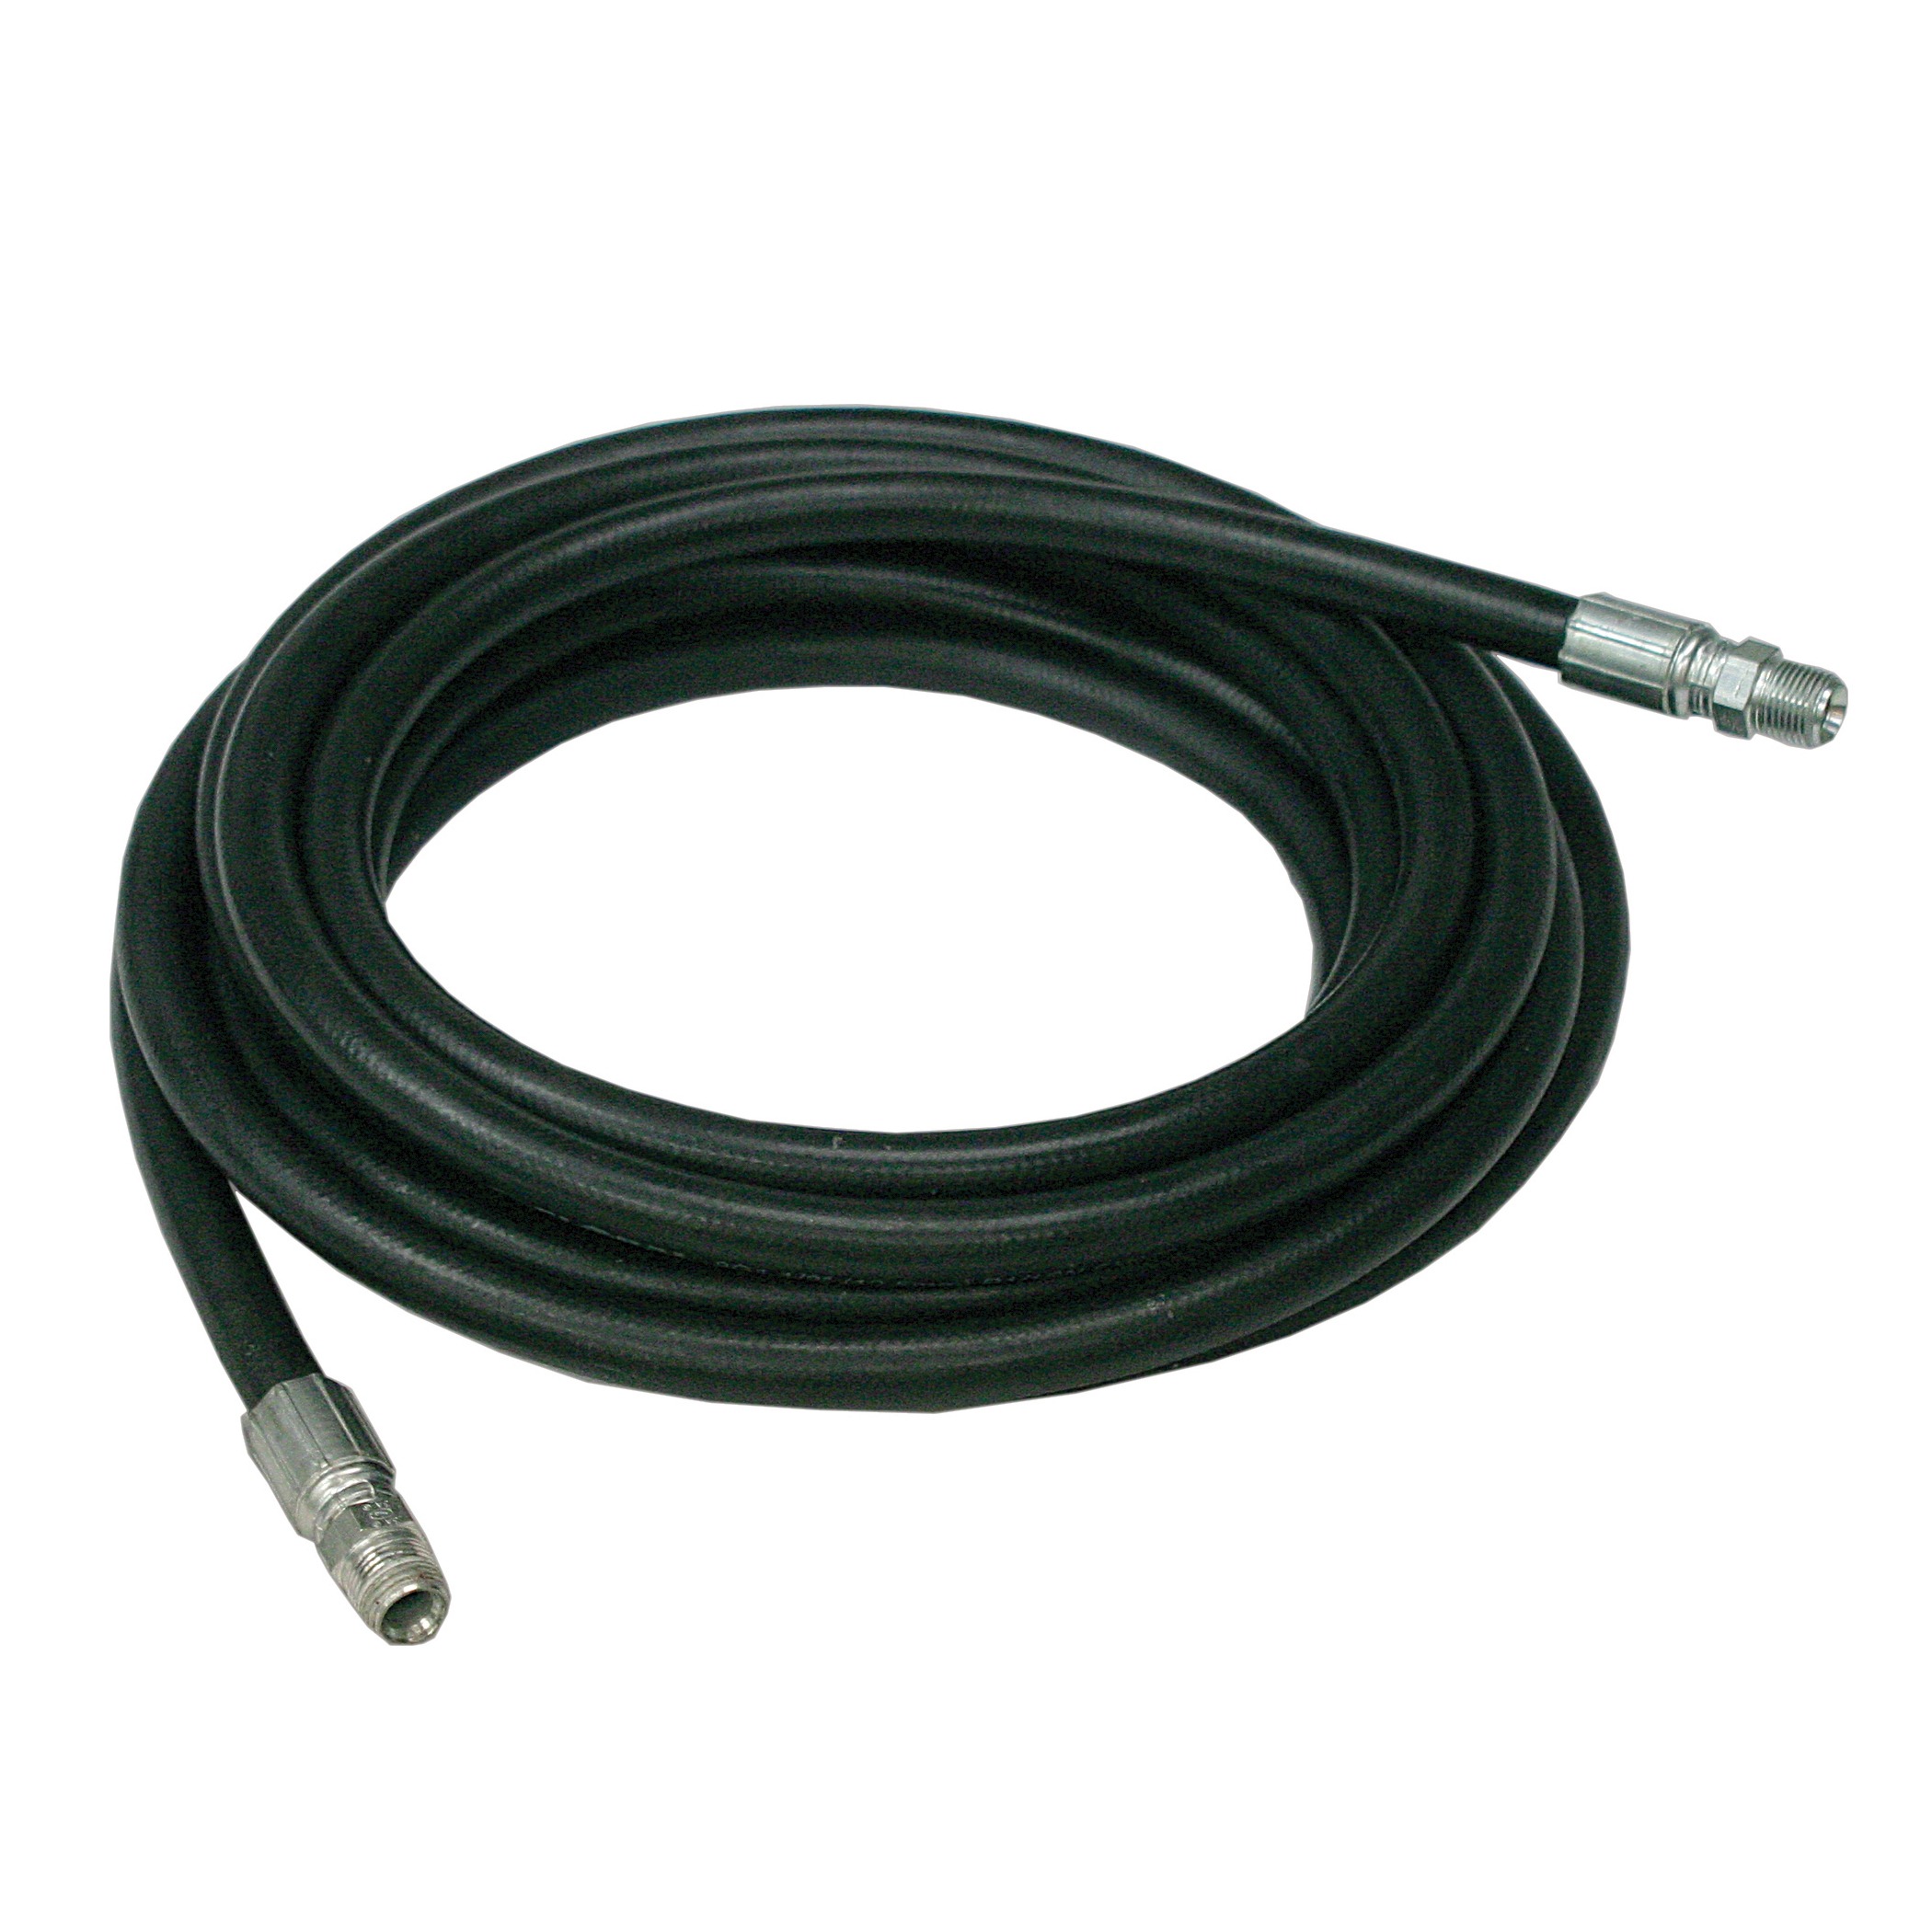 Reelcraft S9-260044 - 1/4 in. x 50 ft. High Pressure Grease Hose